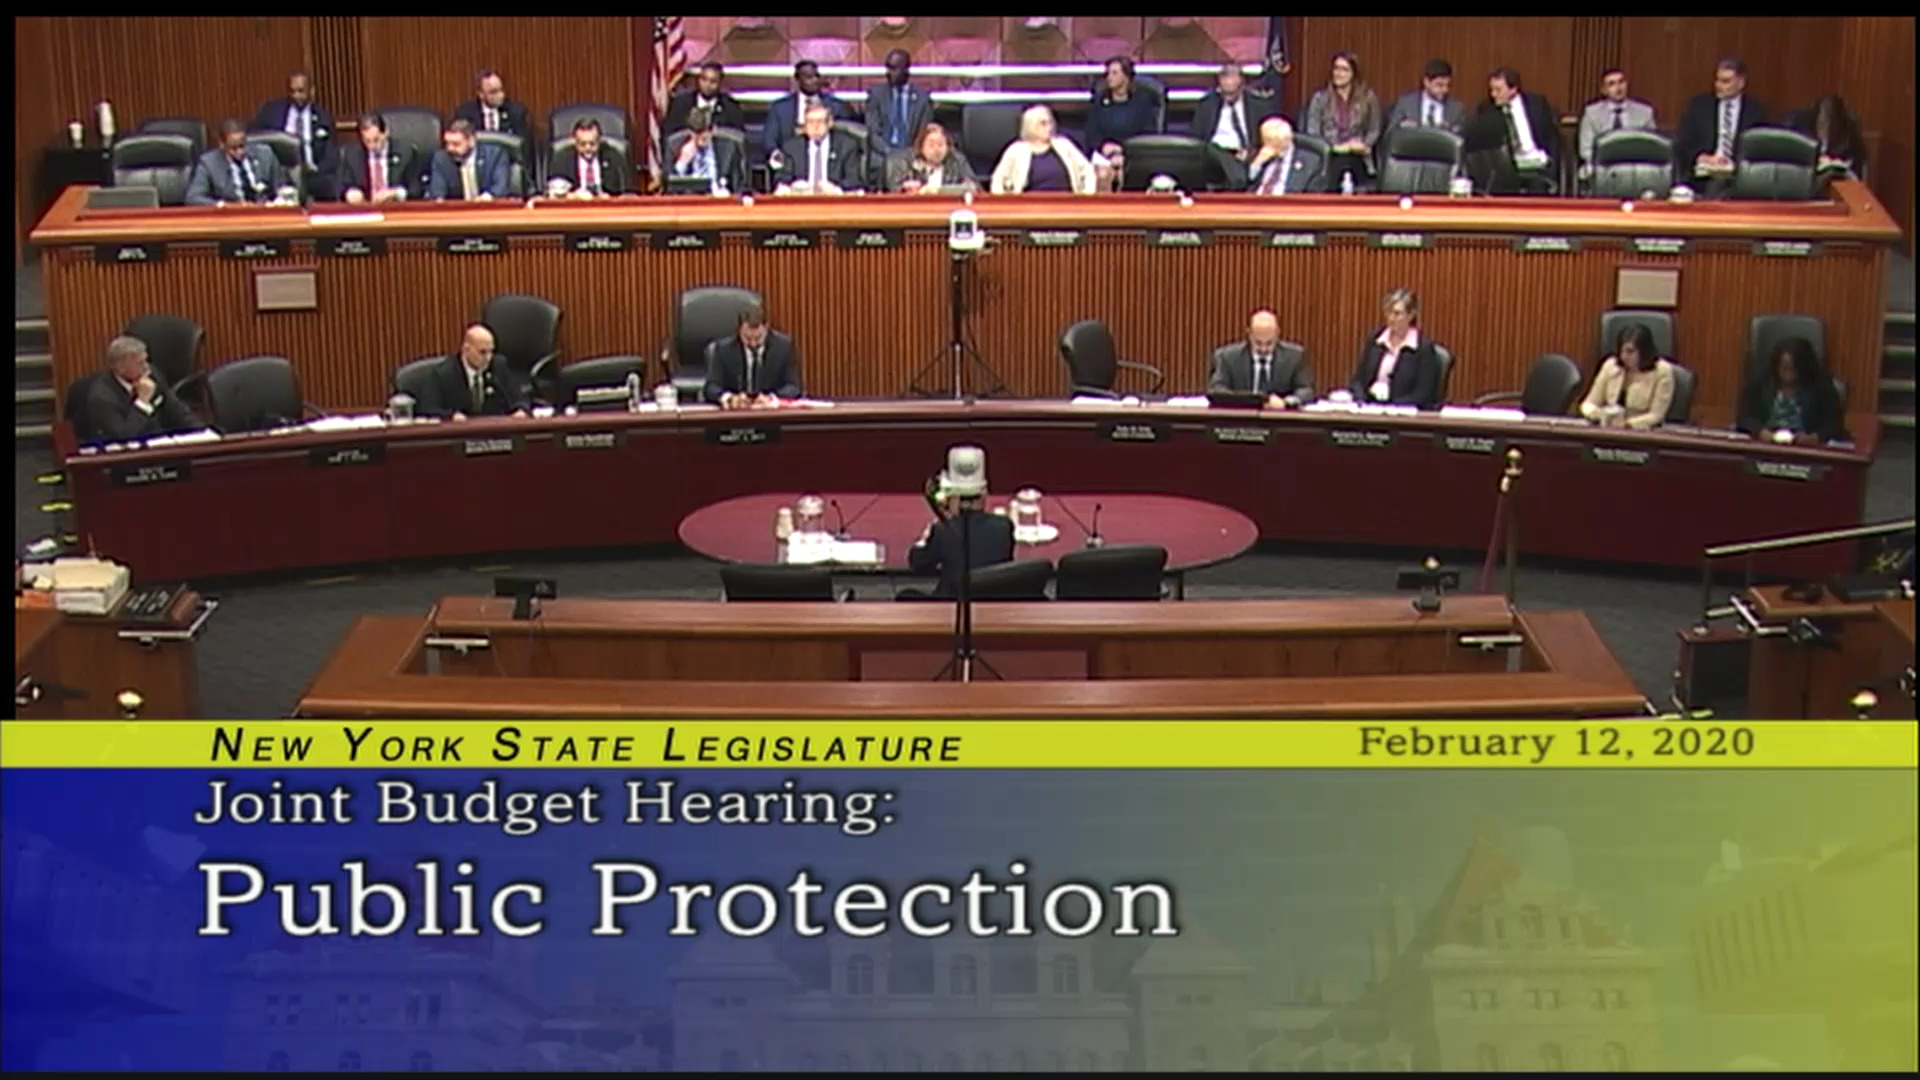 2020 Joint Budget Hearing on Public Protection